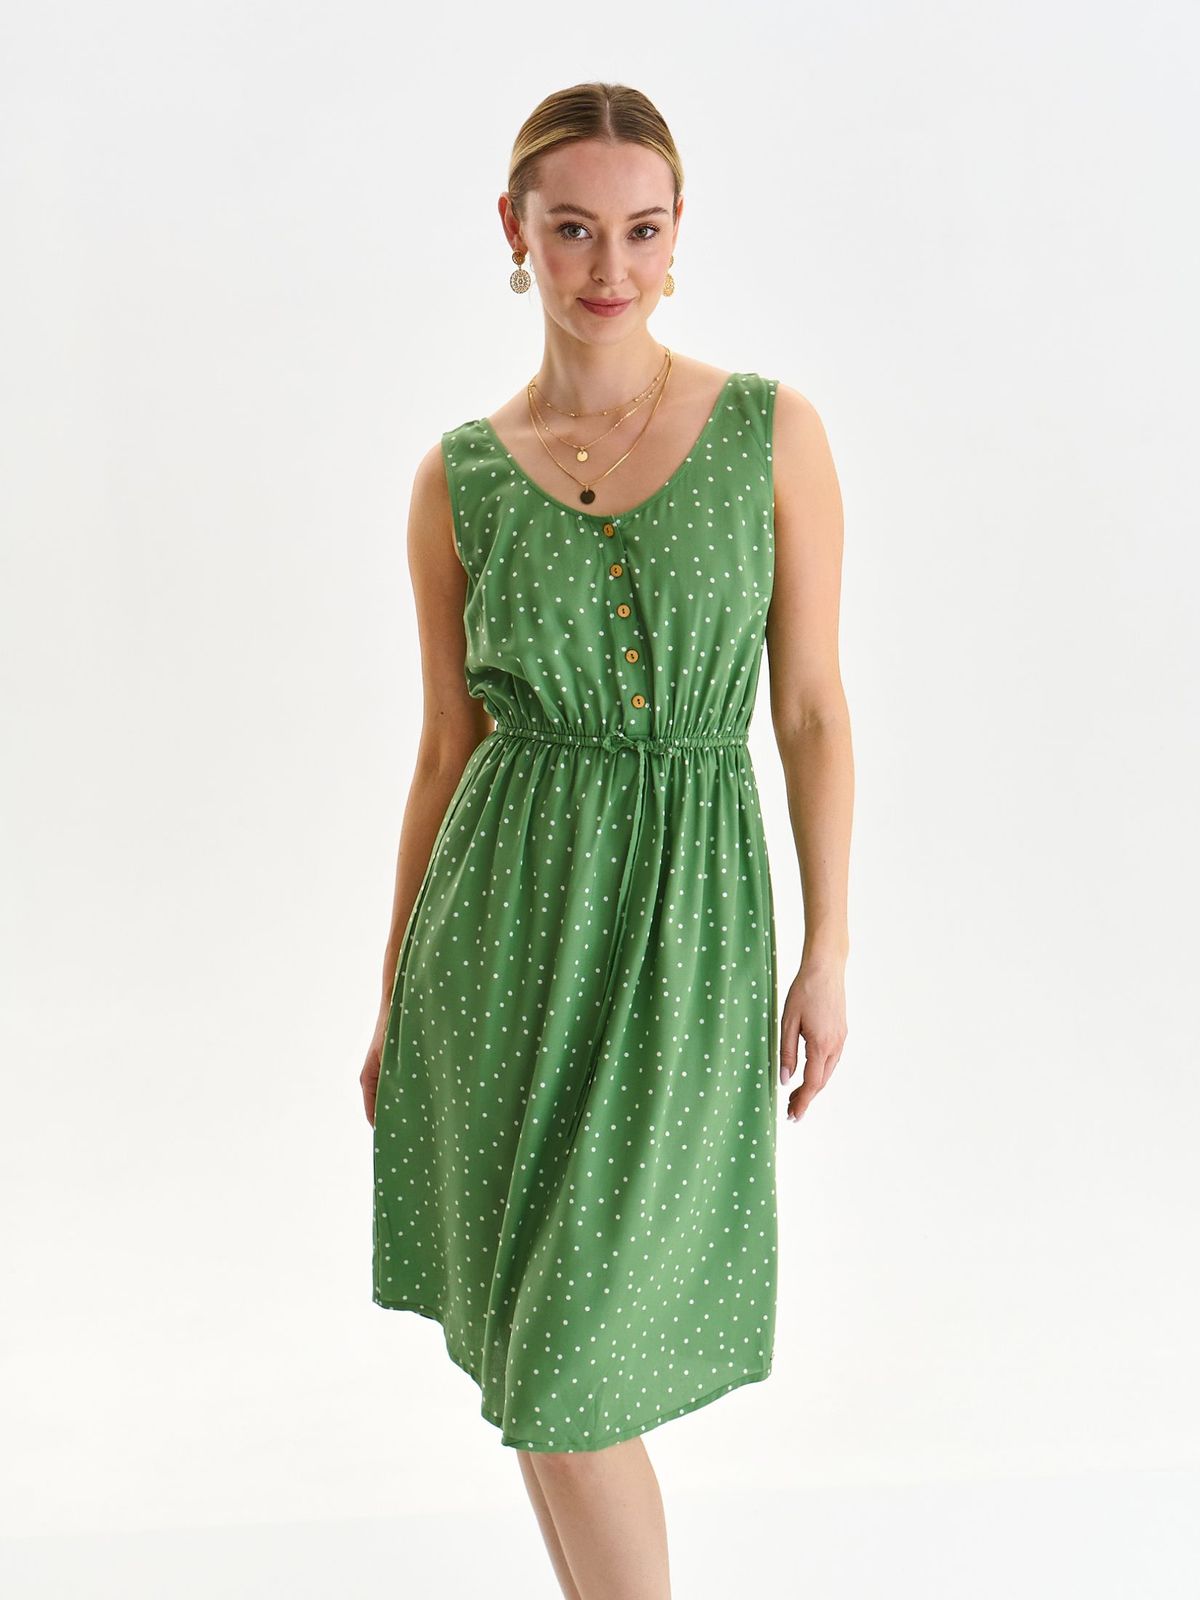 Green dress thin fabric cloche with elastic waist with button accessories is fastened around the waist with a ribbon